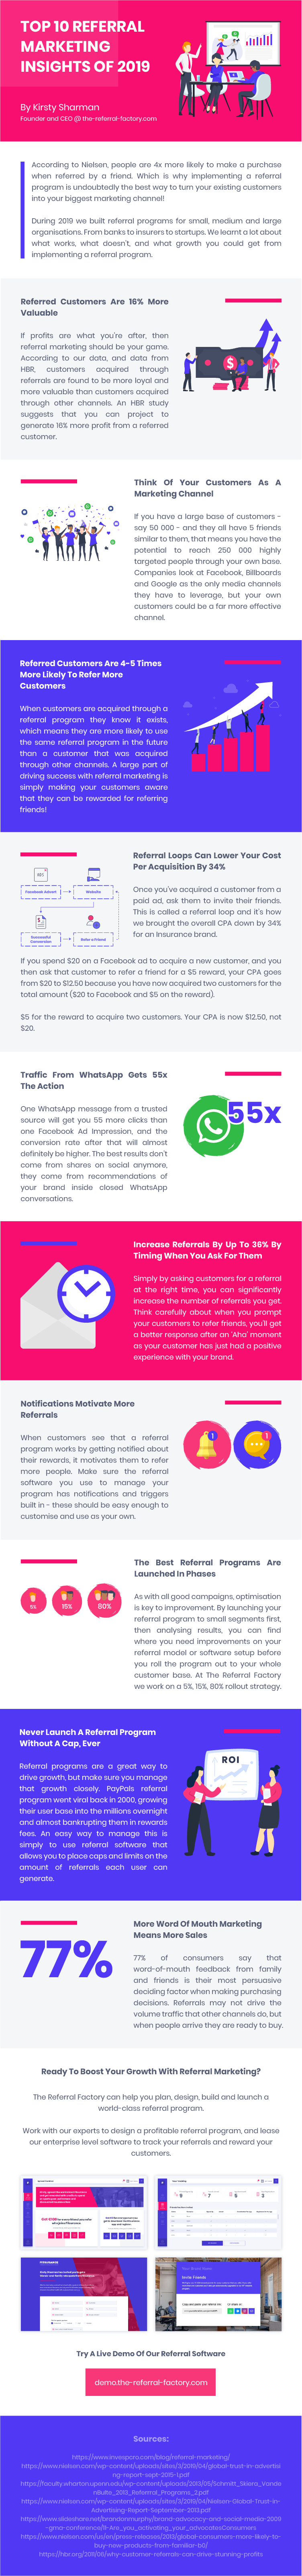 Referral-Marketing-Insights-Infographic-(1).png